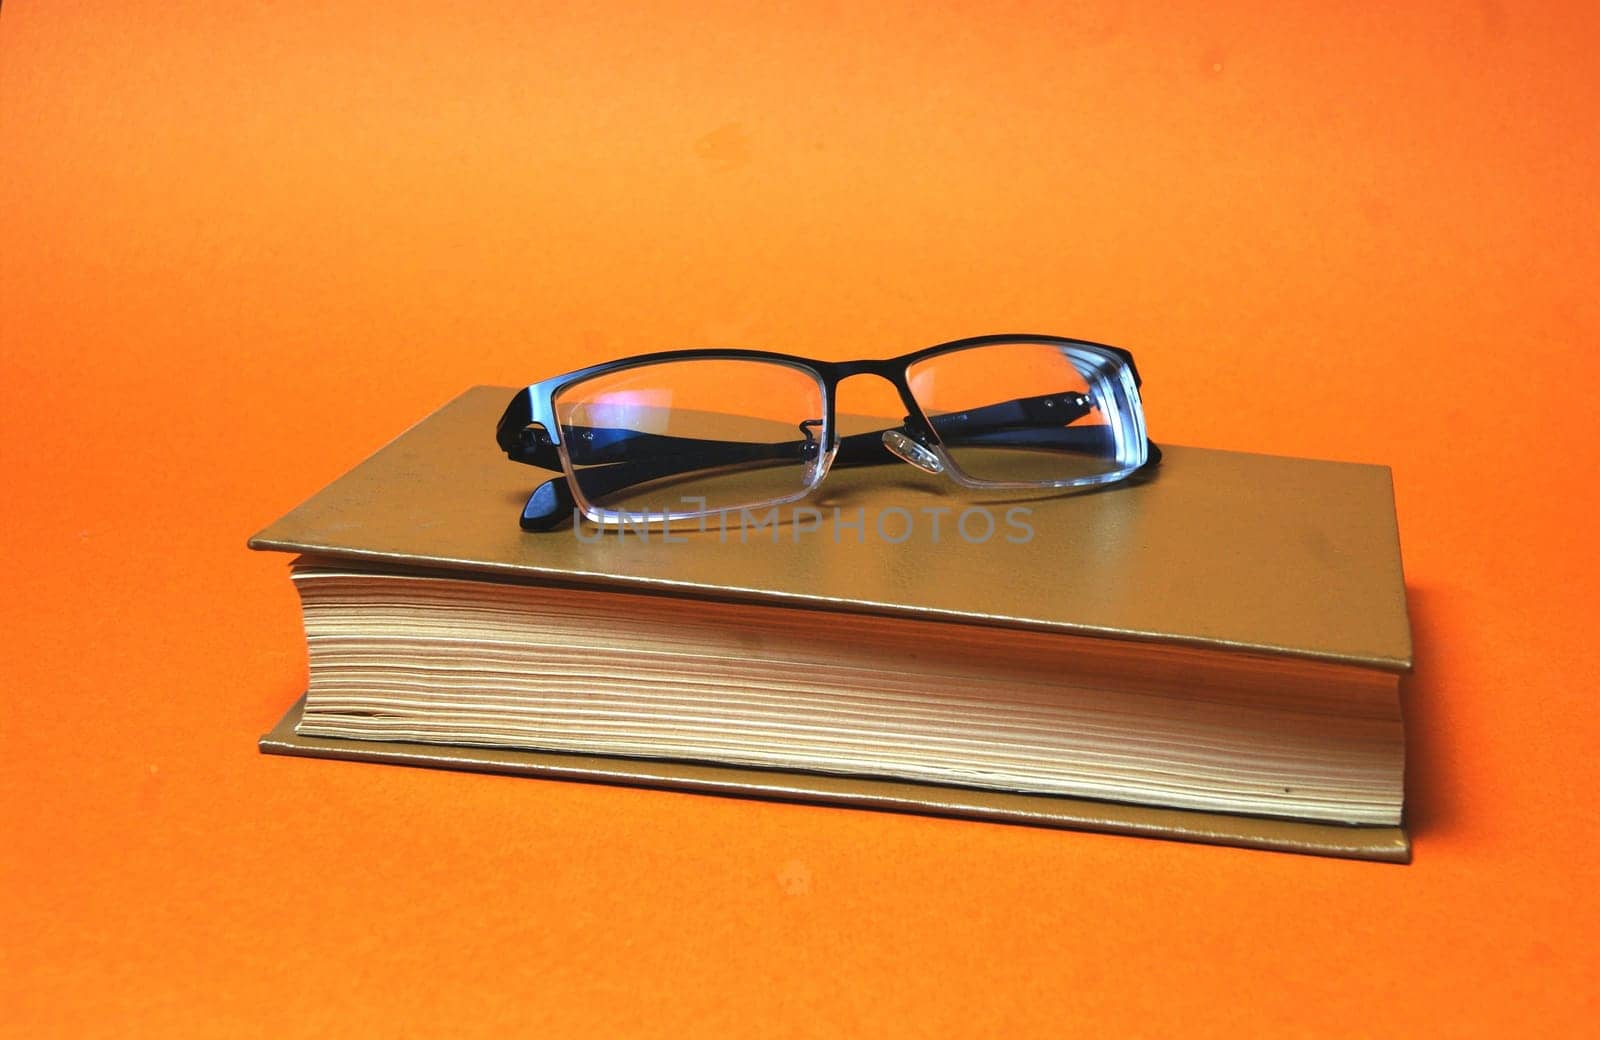 Glasses on a brown book on a bright orange background by Севостьянов